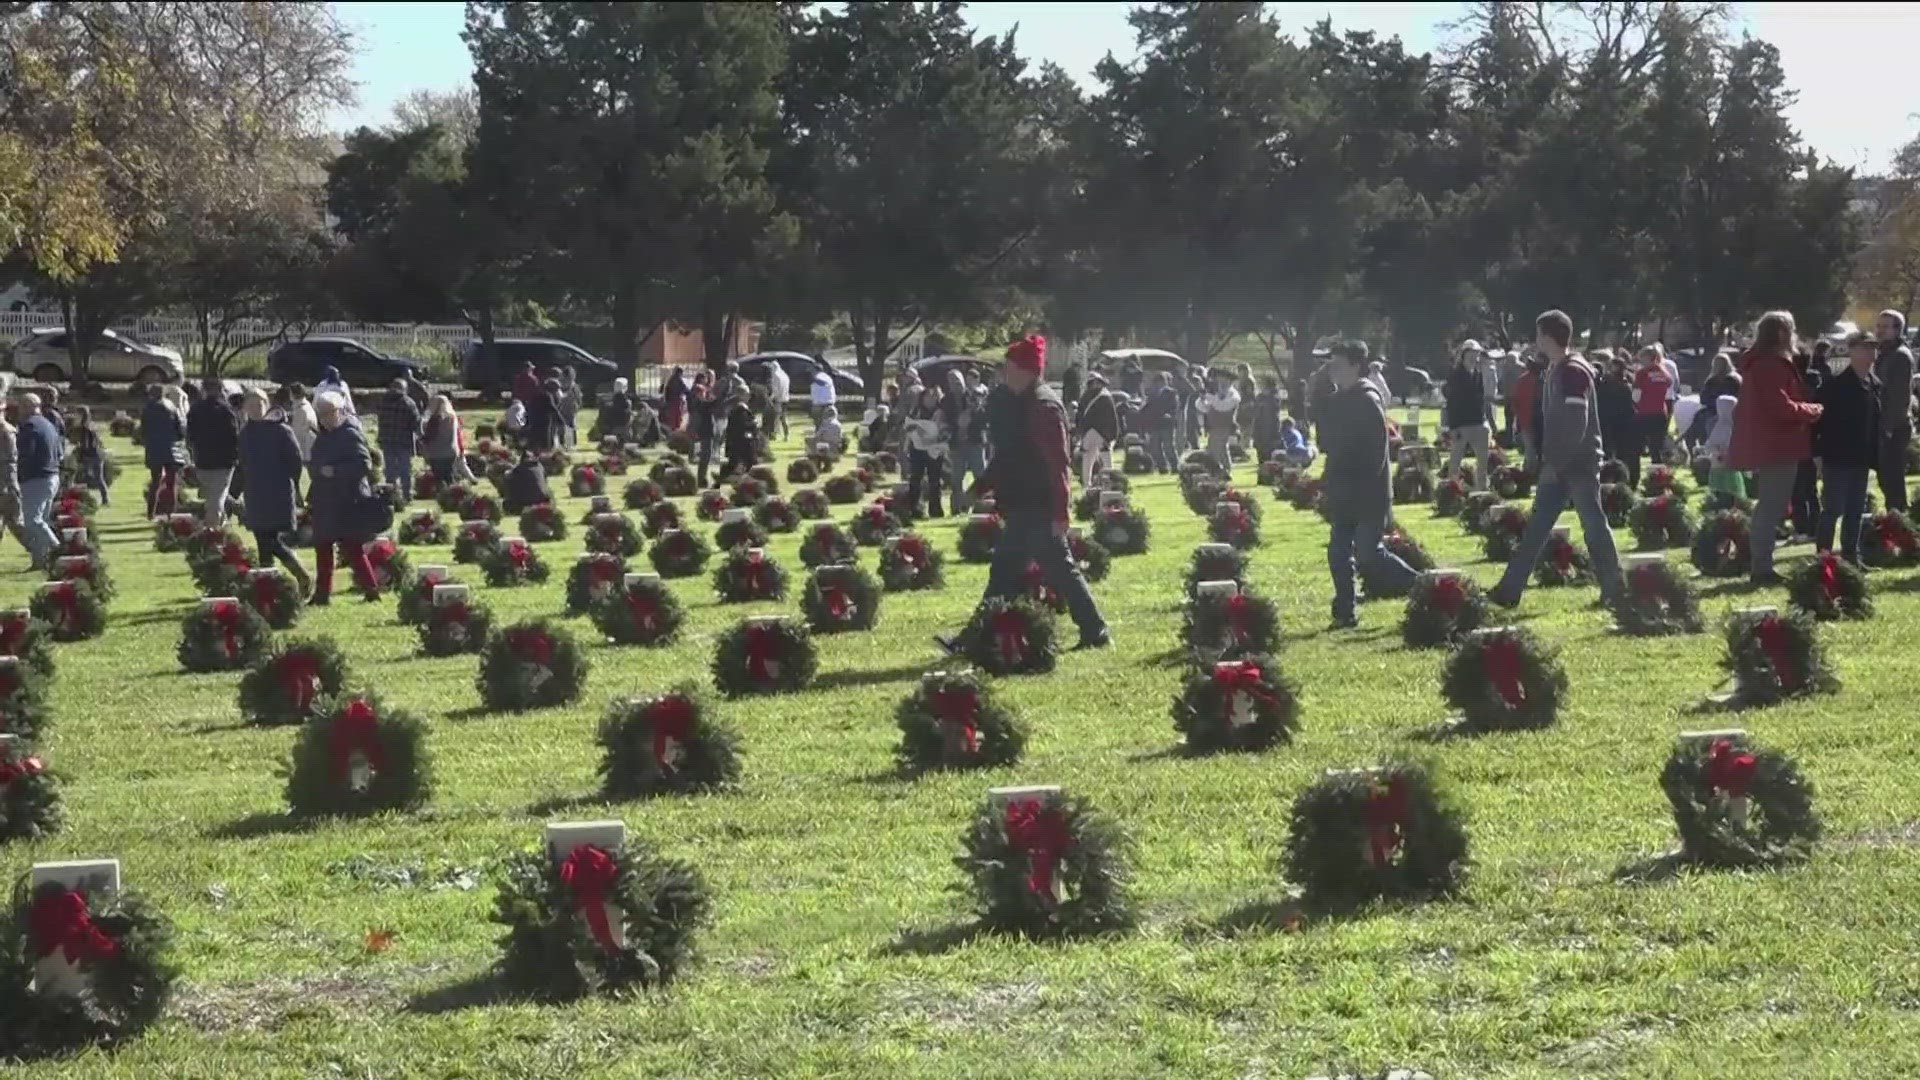 Hundreds of people came out to the Texas State Cemetery in East Austin to honor fallen service members by laying wreaths on their graves.